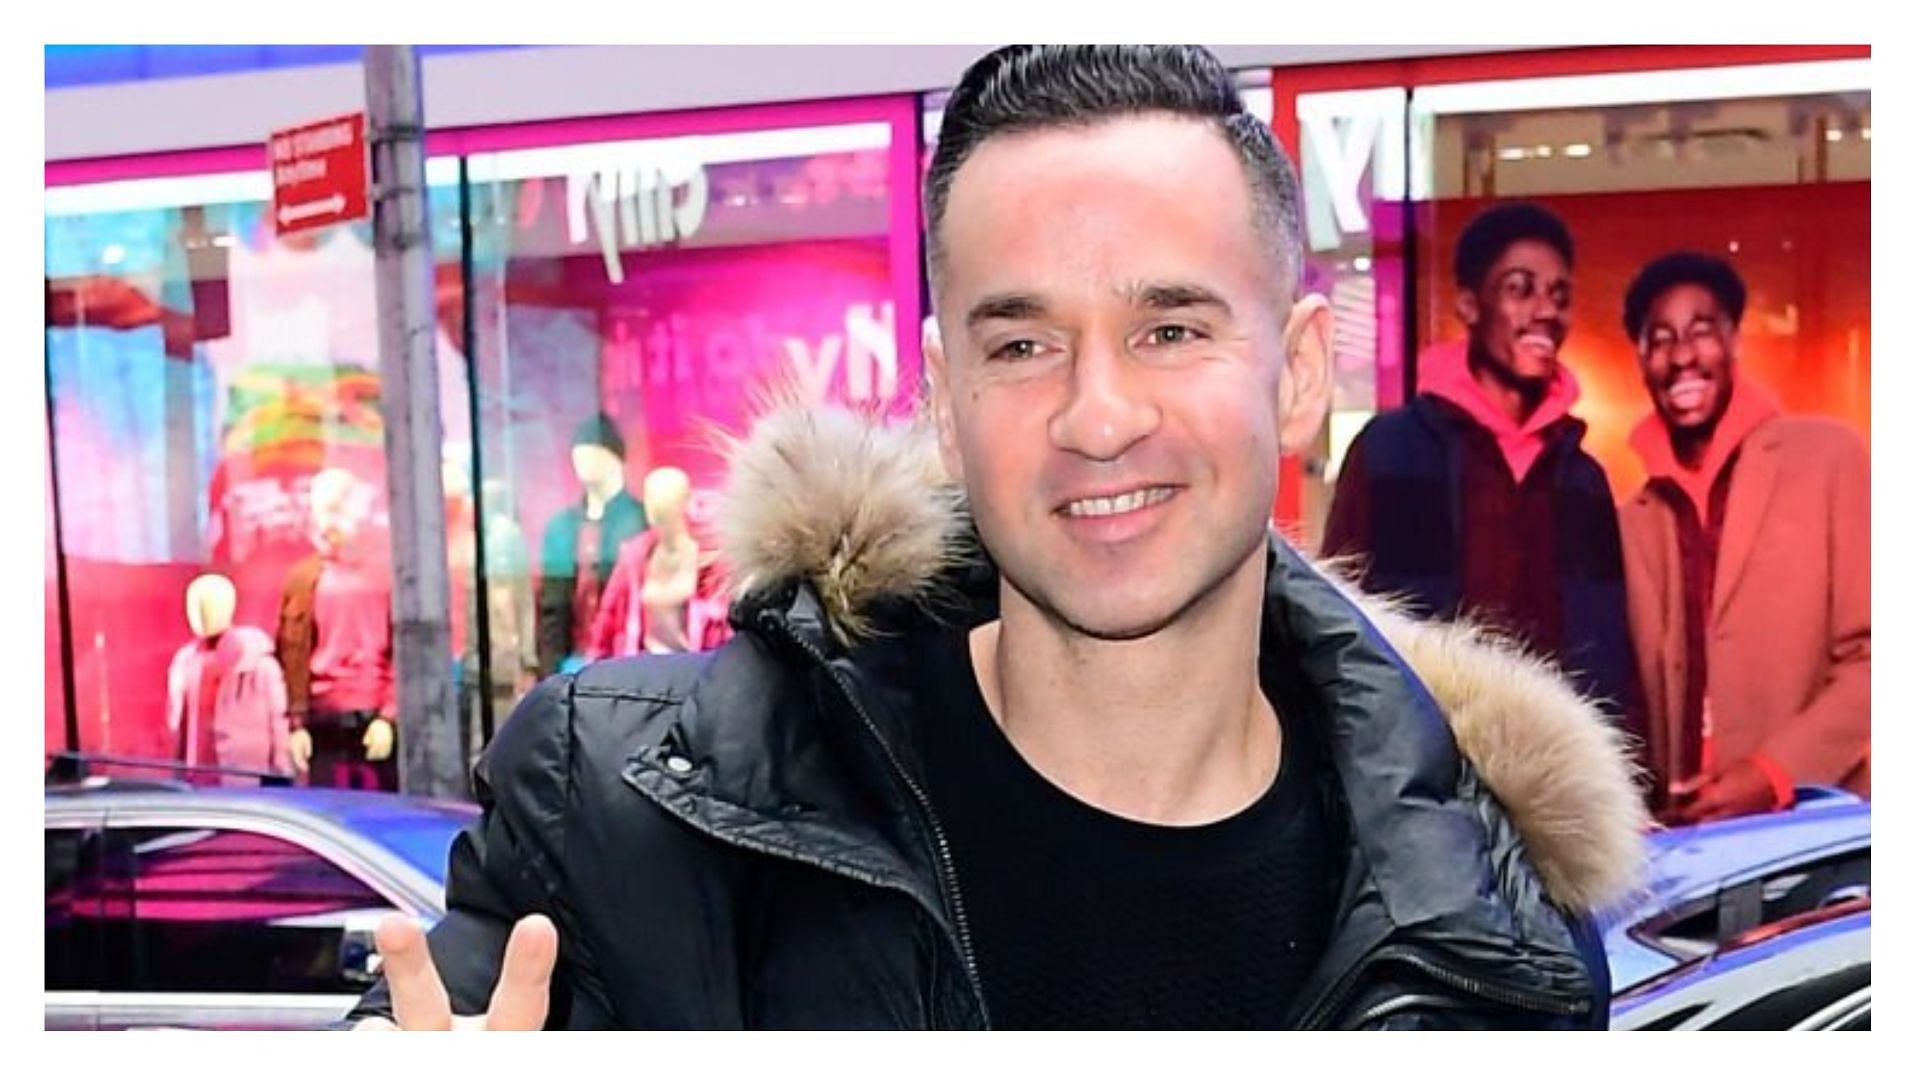 Mike Sorrentino has earned a lot from his work on reality TV shows (Image via Raymond Hall/Getty Images)